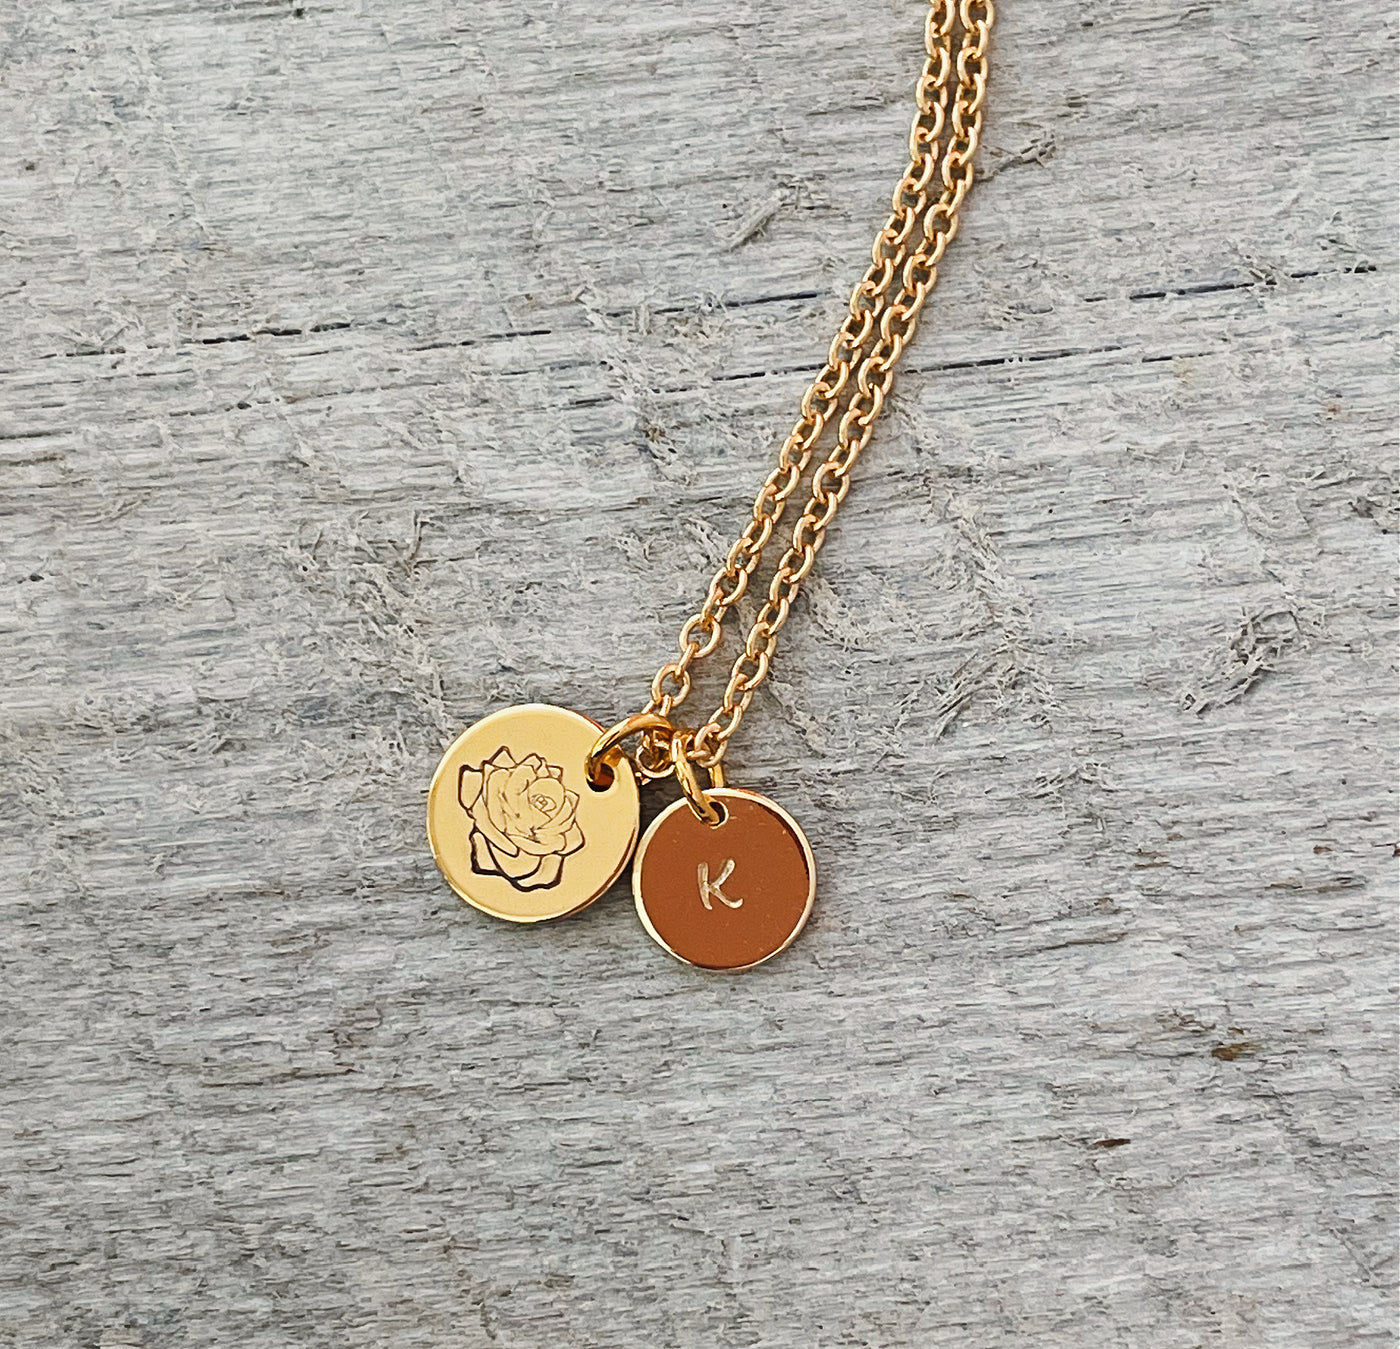 Birth Flower Necklace in Gold with Initial